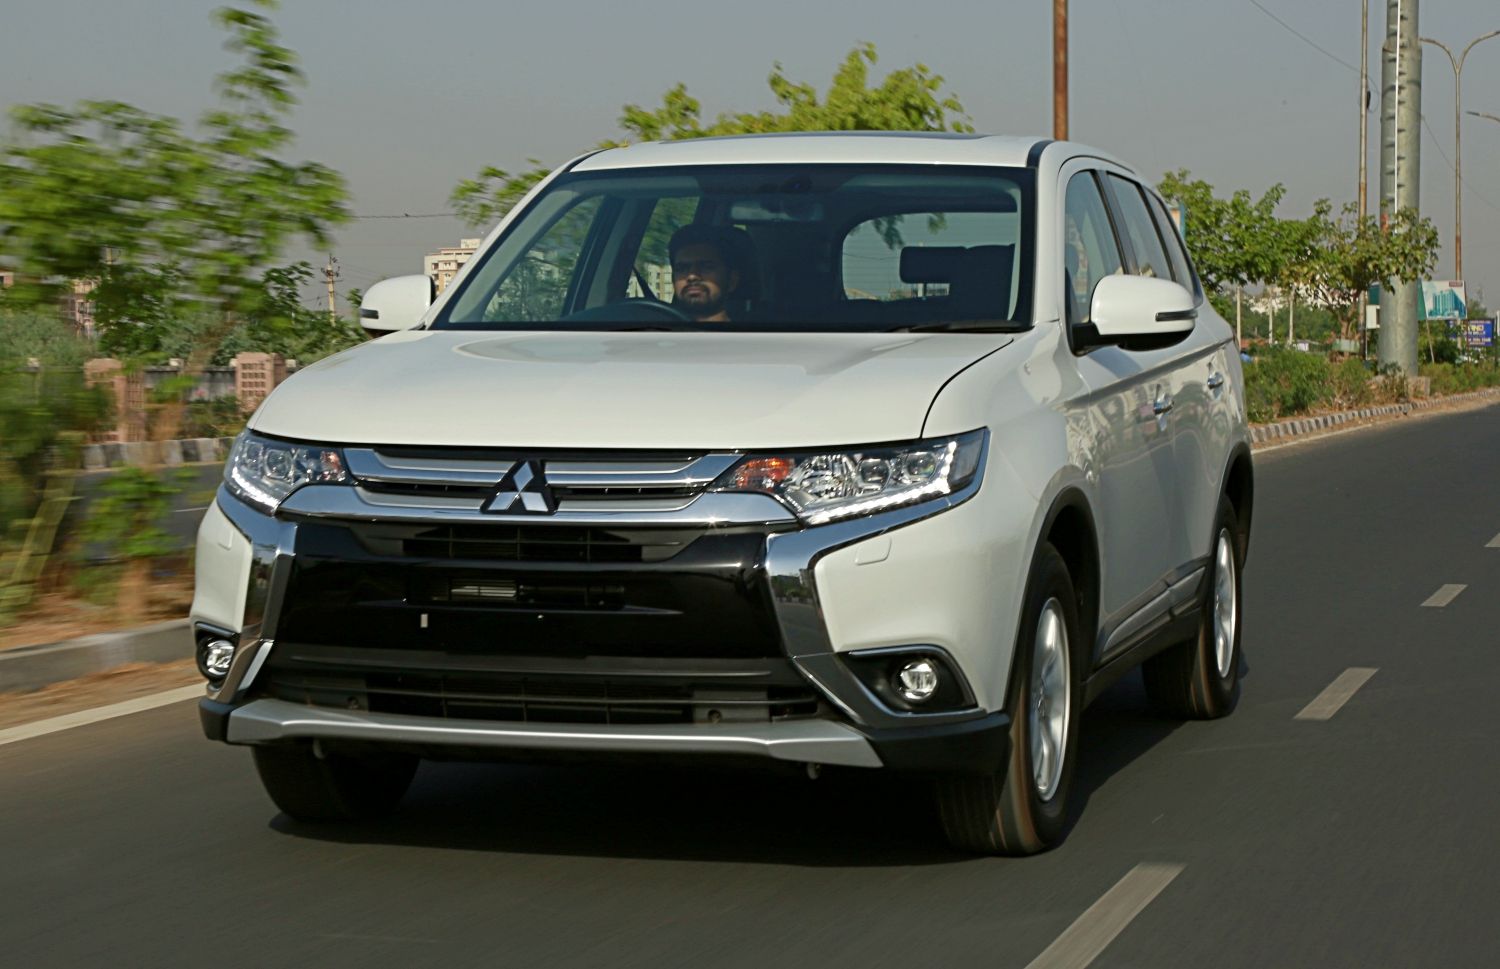 Mitsubishi Outlander: First Drive Review